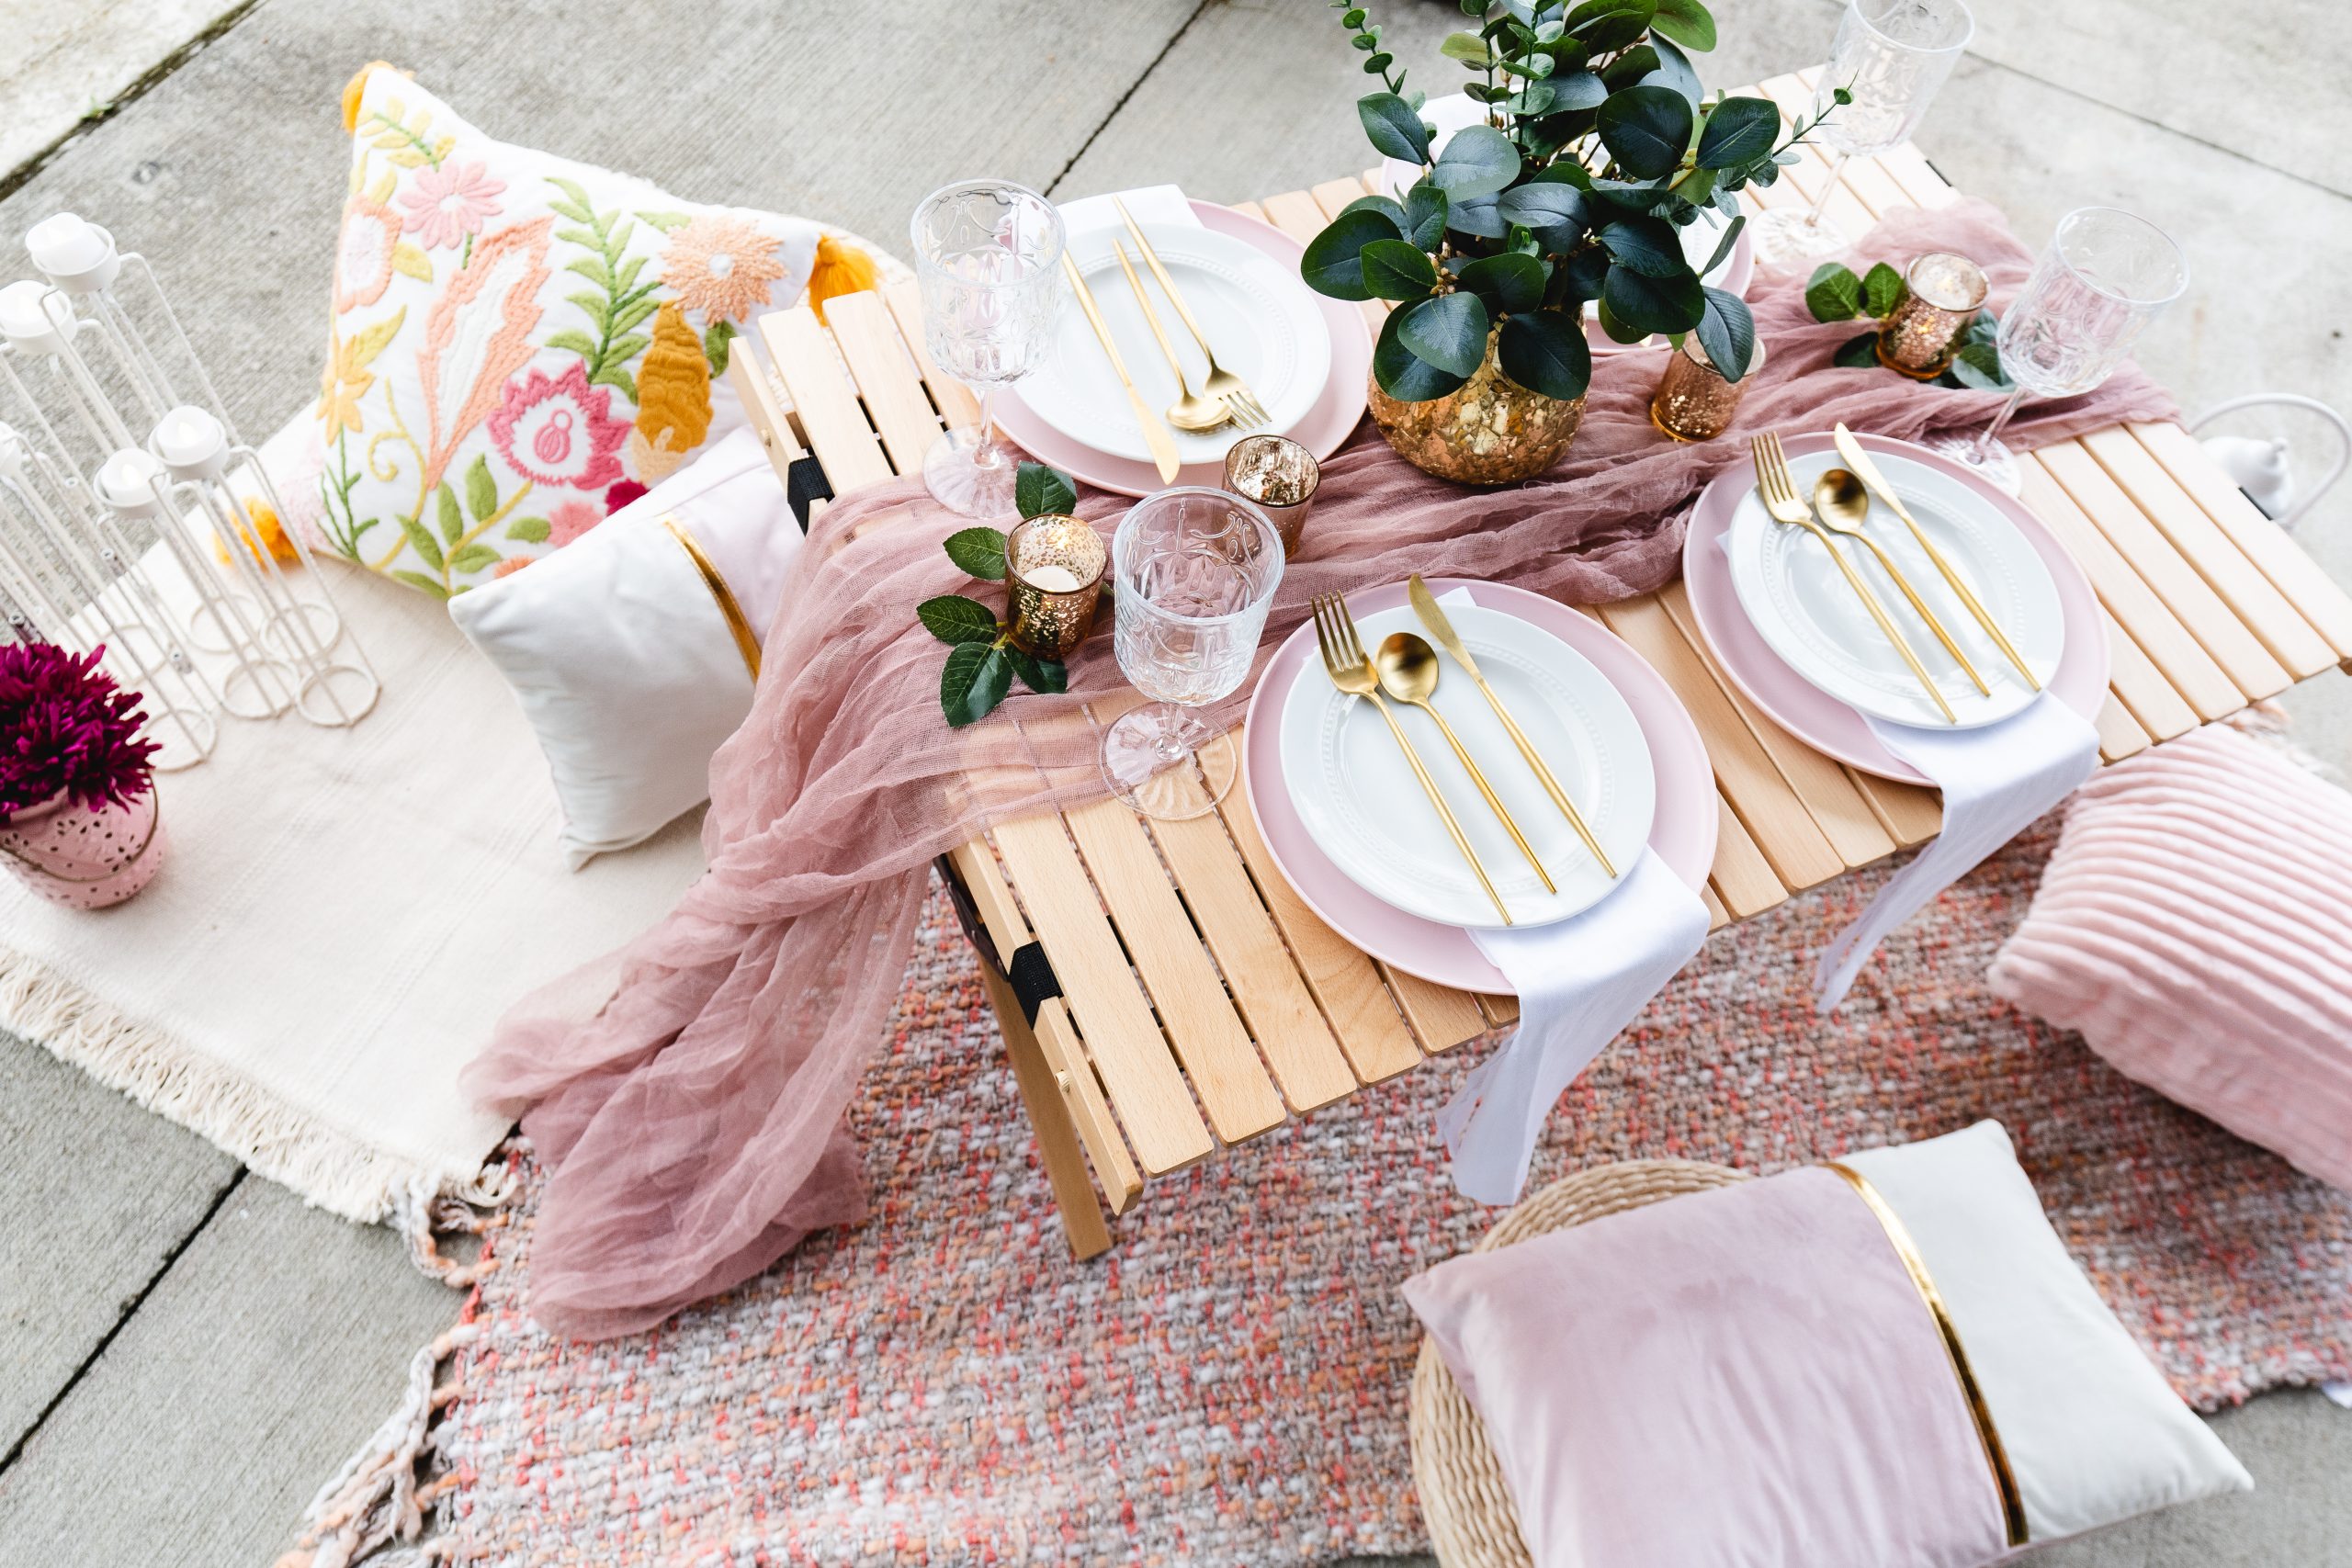 Mini bottles of pink champagne are great for making a picnic extra special